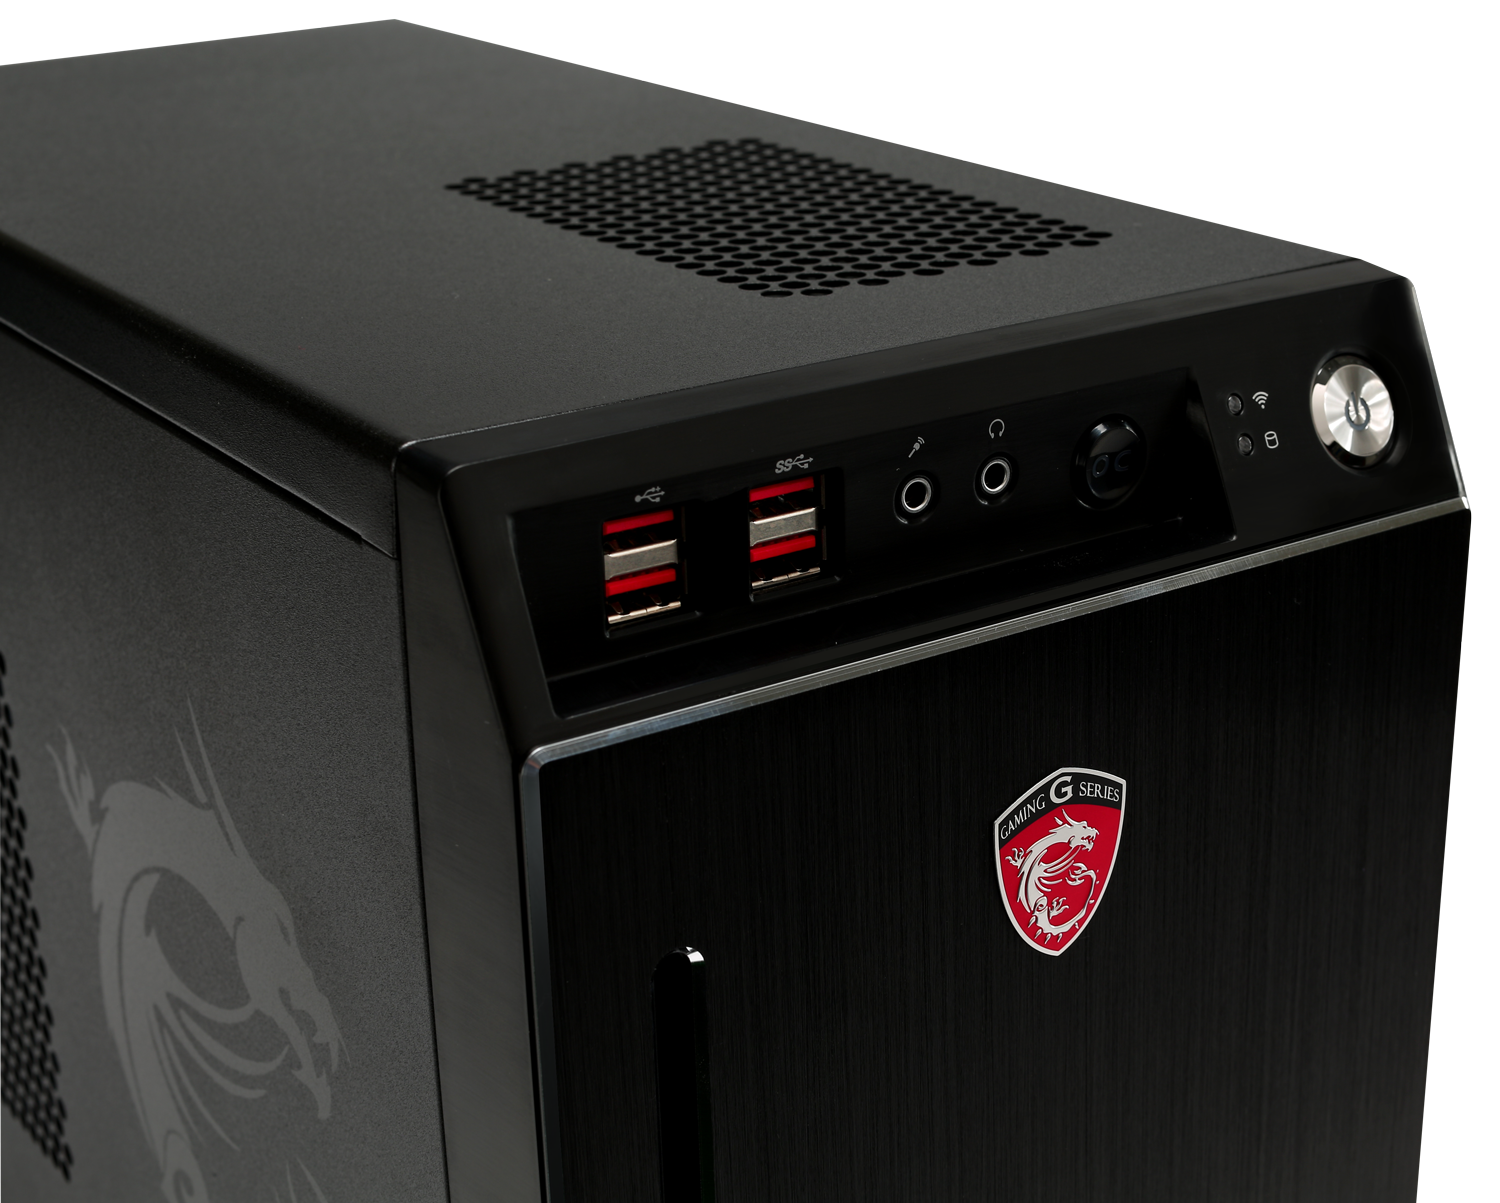 MSI Launches the Nightblade Gaming a mini-ITX with OC